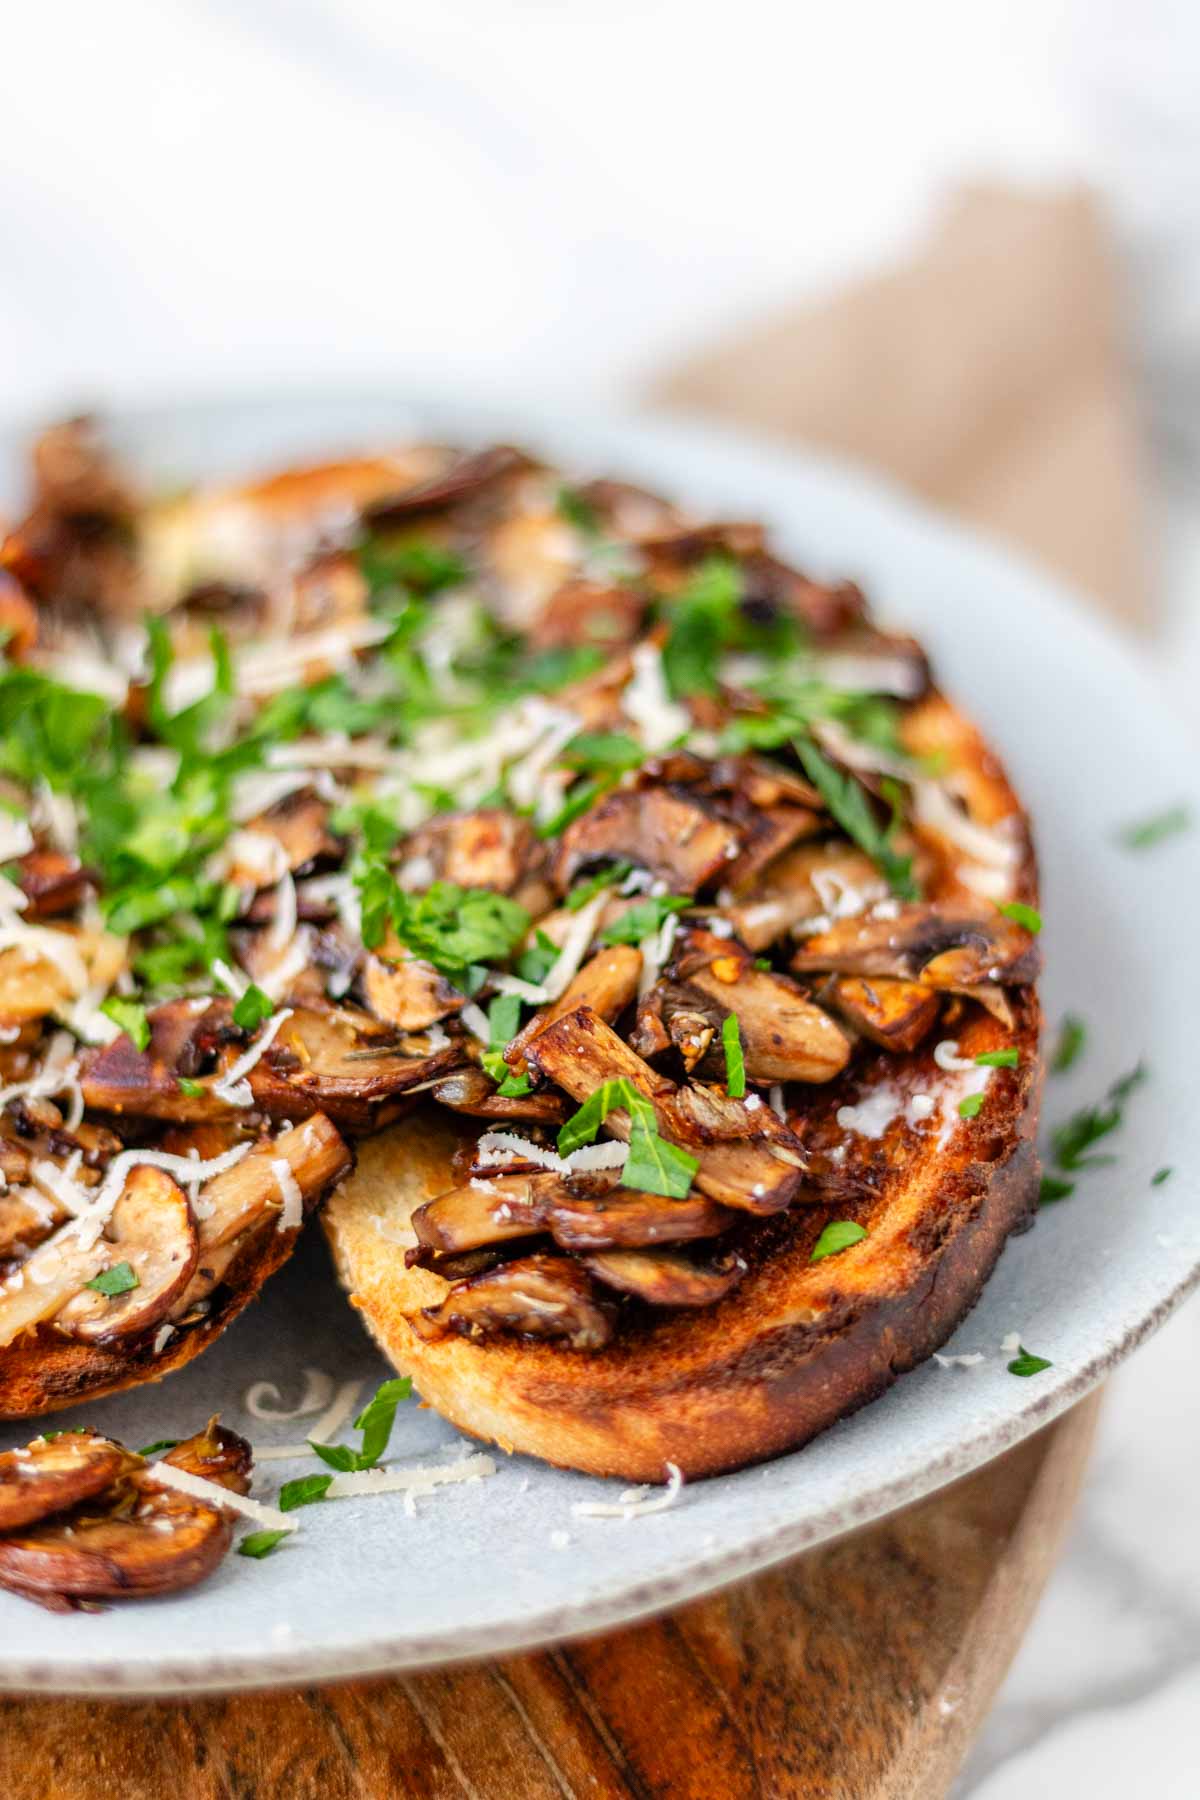 Toast on a plate topped with mushrooms, cheese, and parsley.